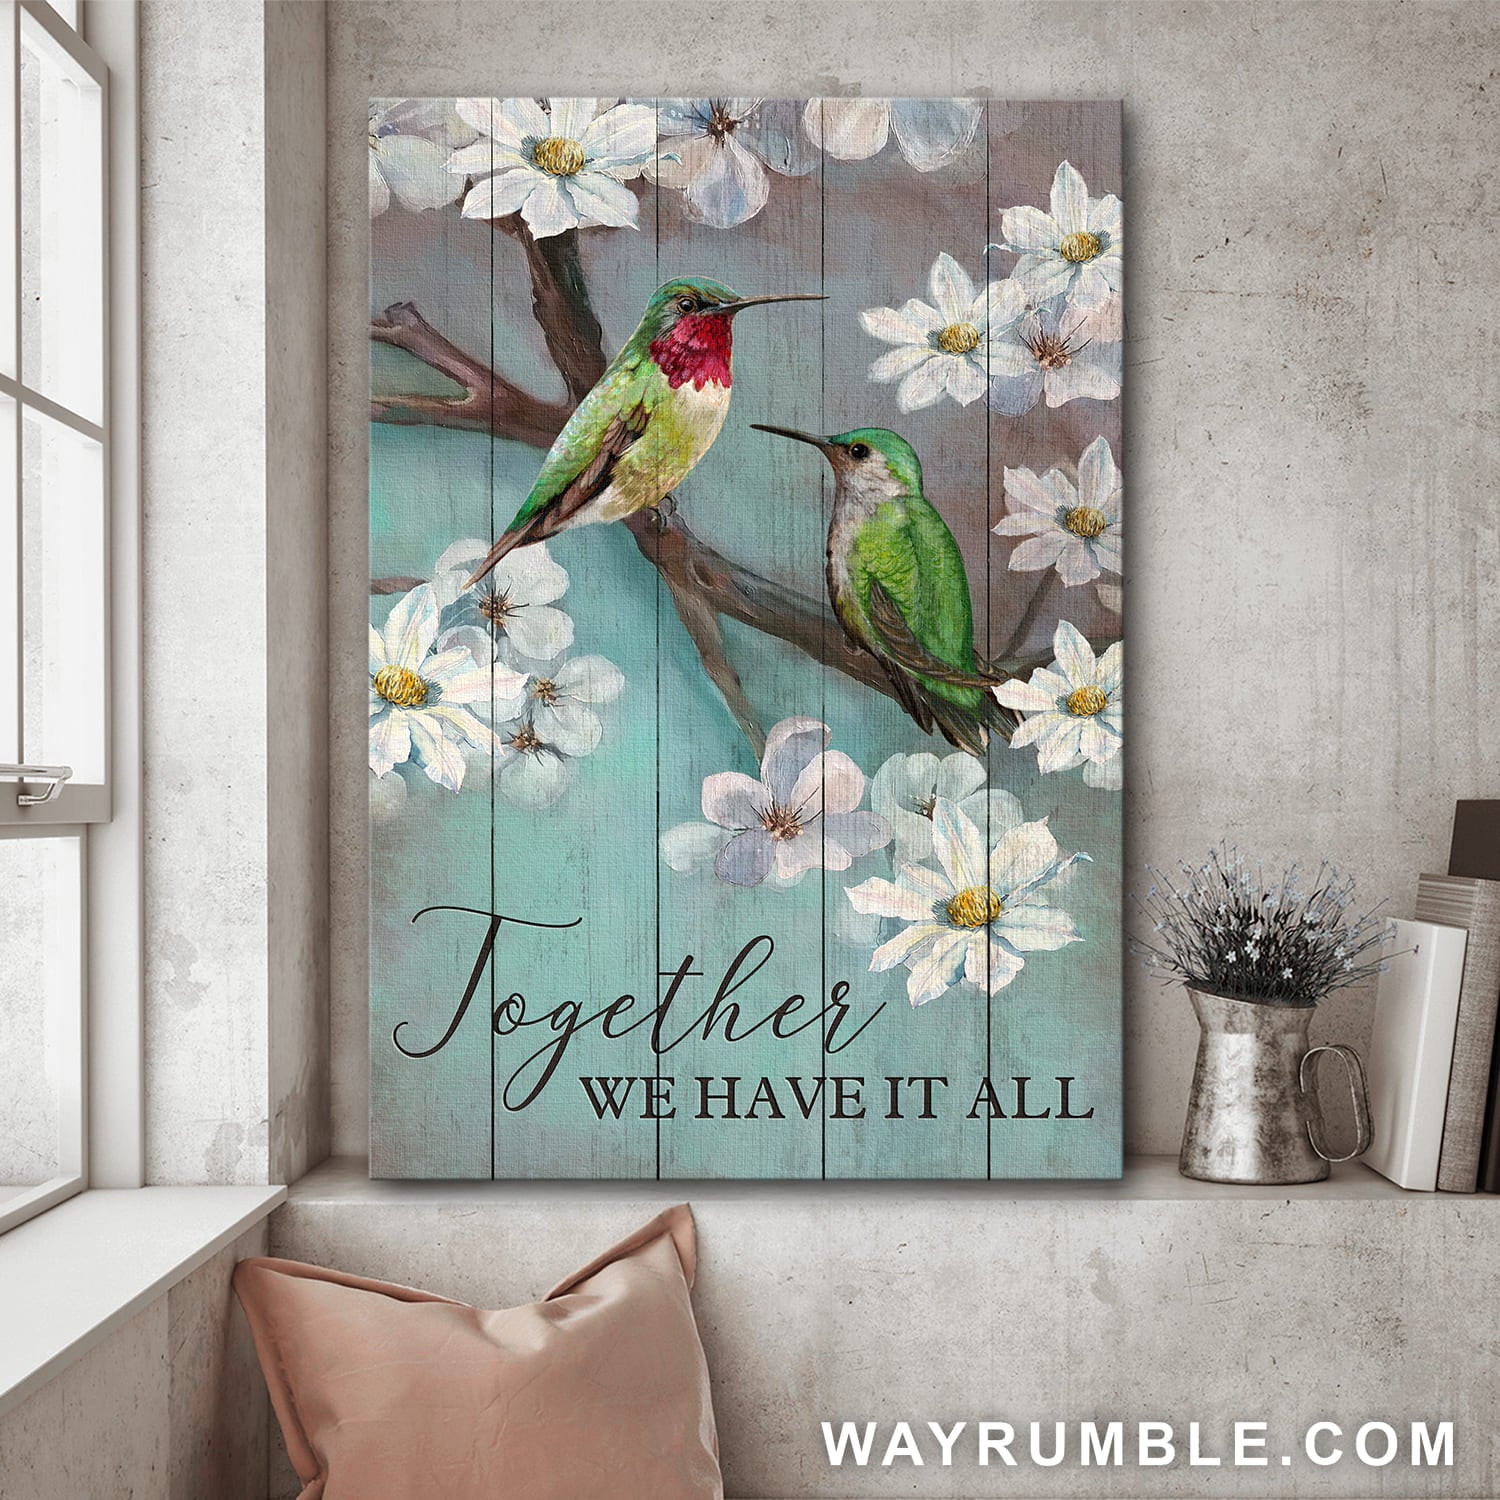 Hummingbird couple, Tree branch, White flower, Together we have it all - Couple Portrait Canvas Prints, Wall Art